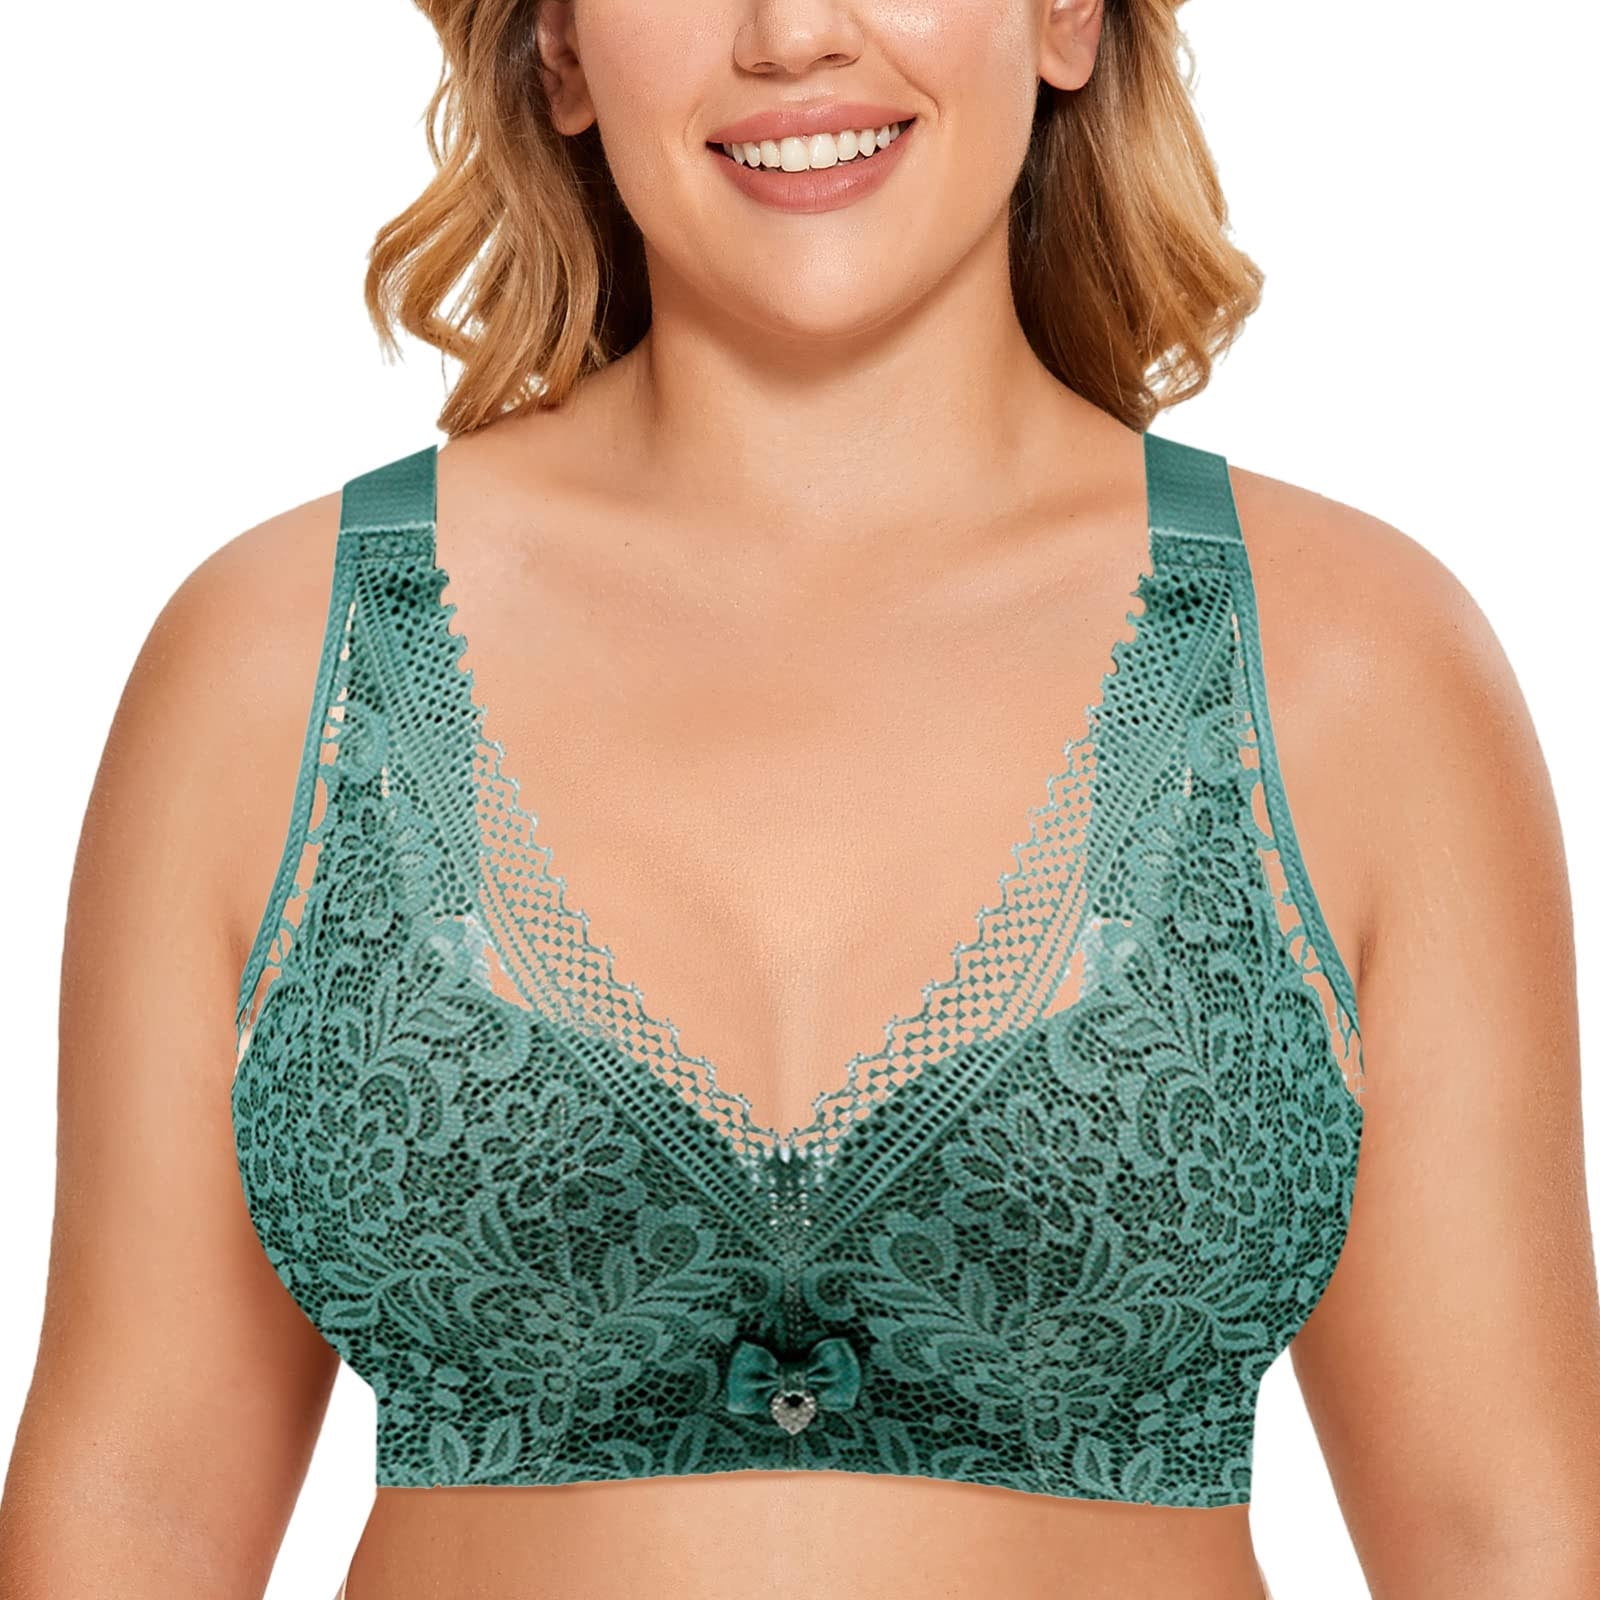 CAICJ98 Lingerie for Women Comfort Devotion Lace Bra, Wirefree Bra with  Full Coverage, Push-Up Bra with Natural Lift, Comfortable Bra Green,40/90D  